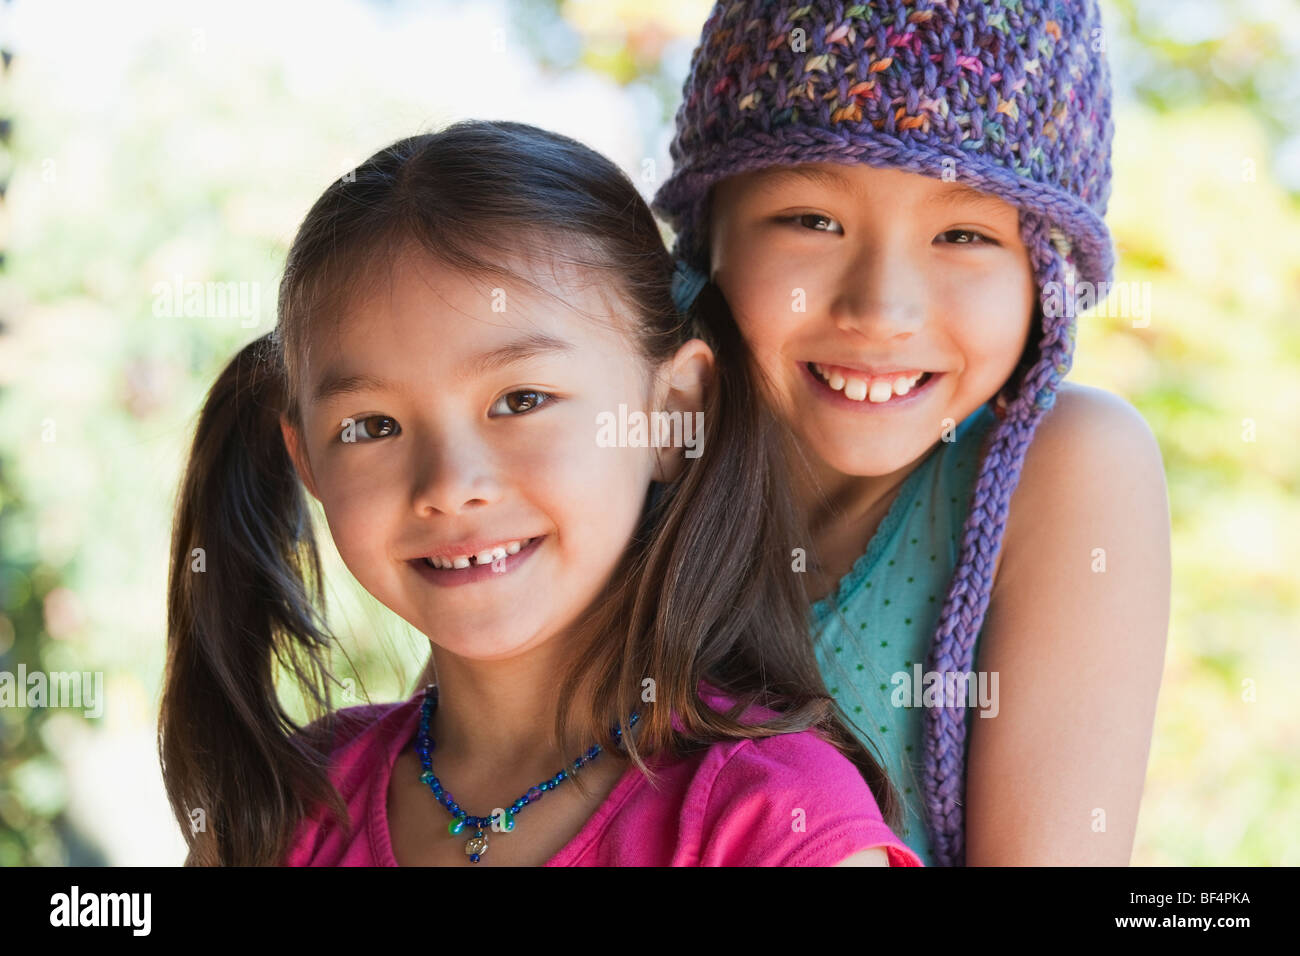 Girls hugging and smiling Stock Photo